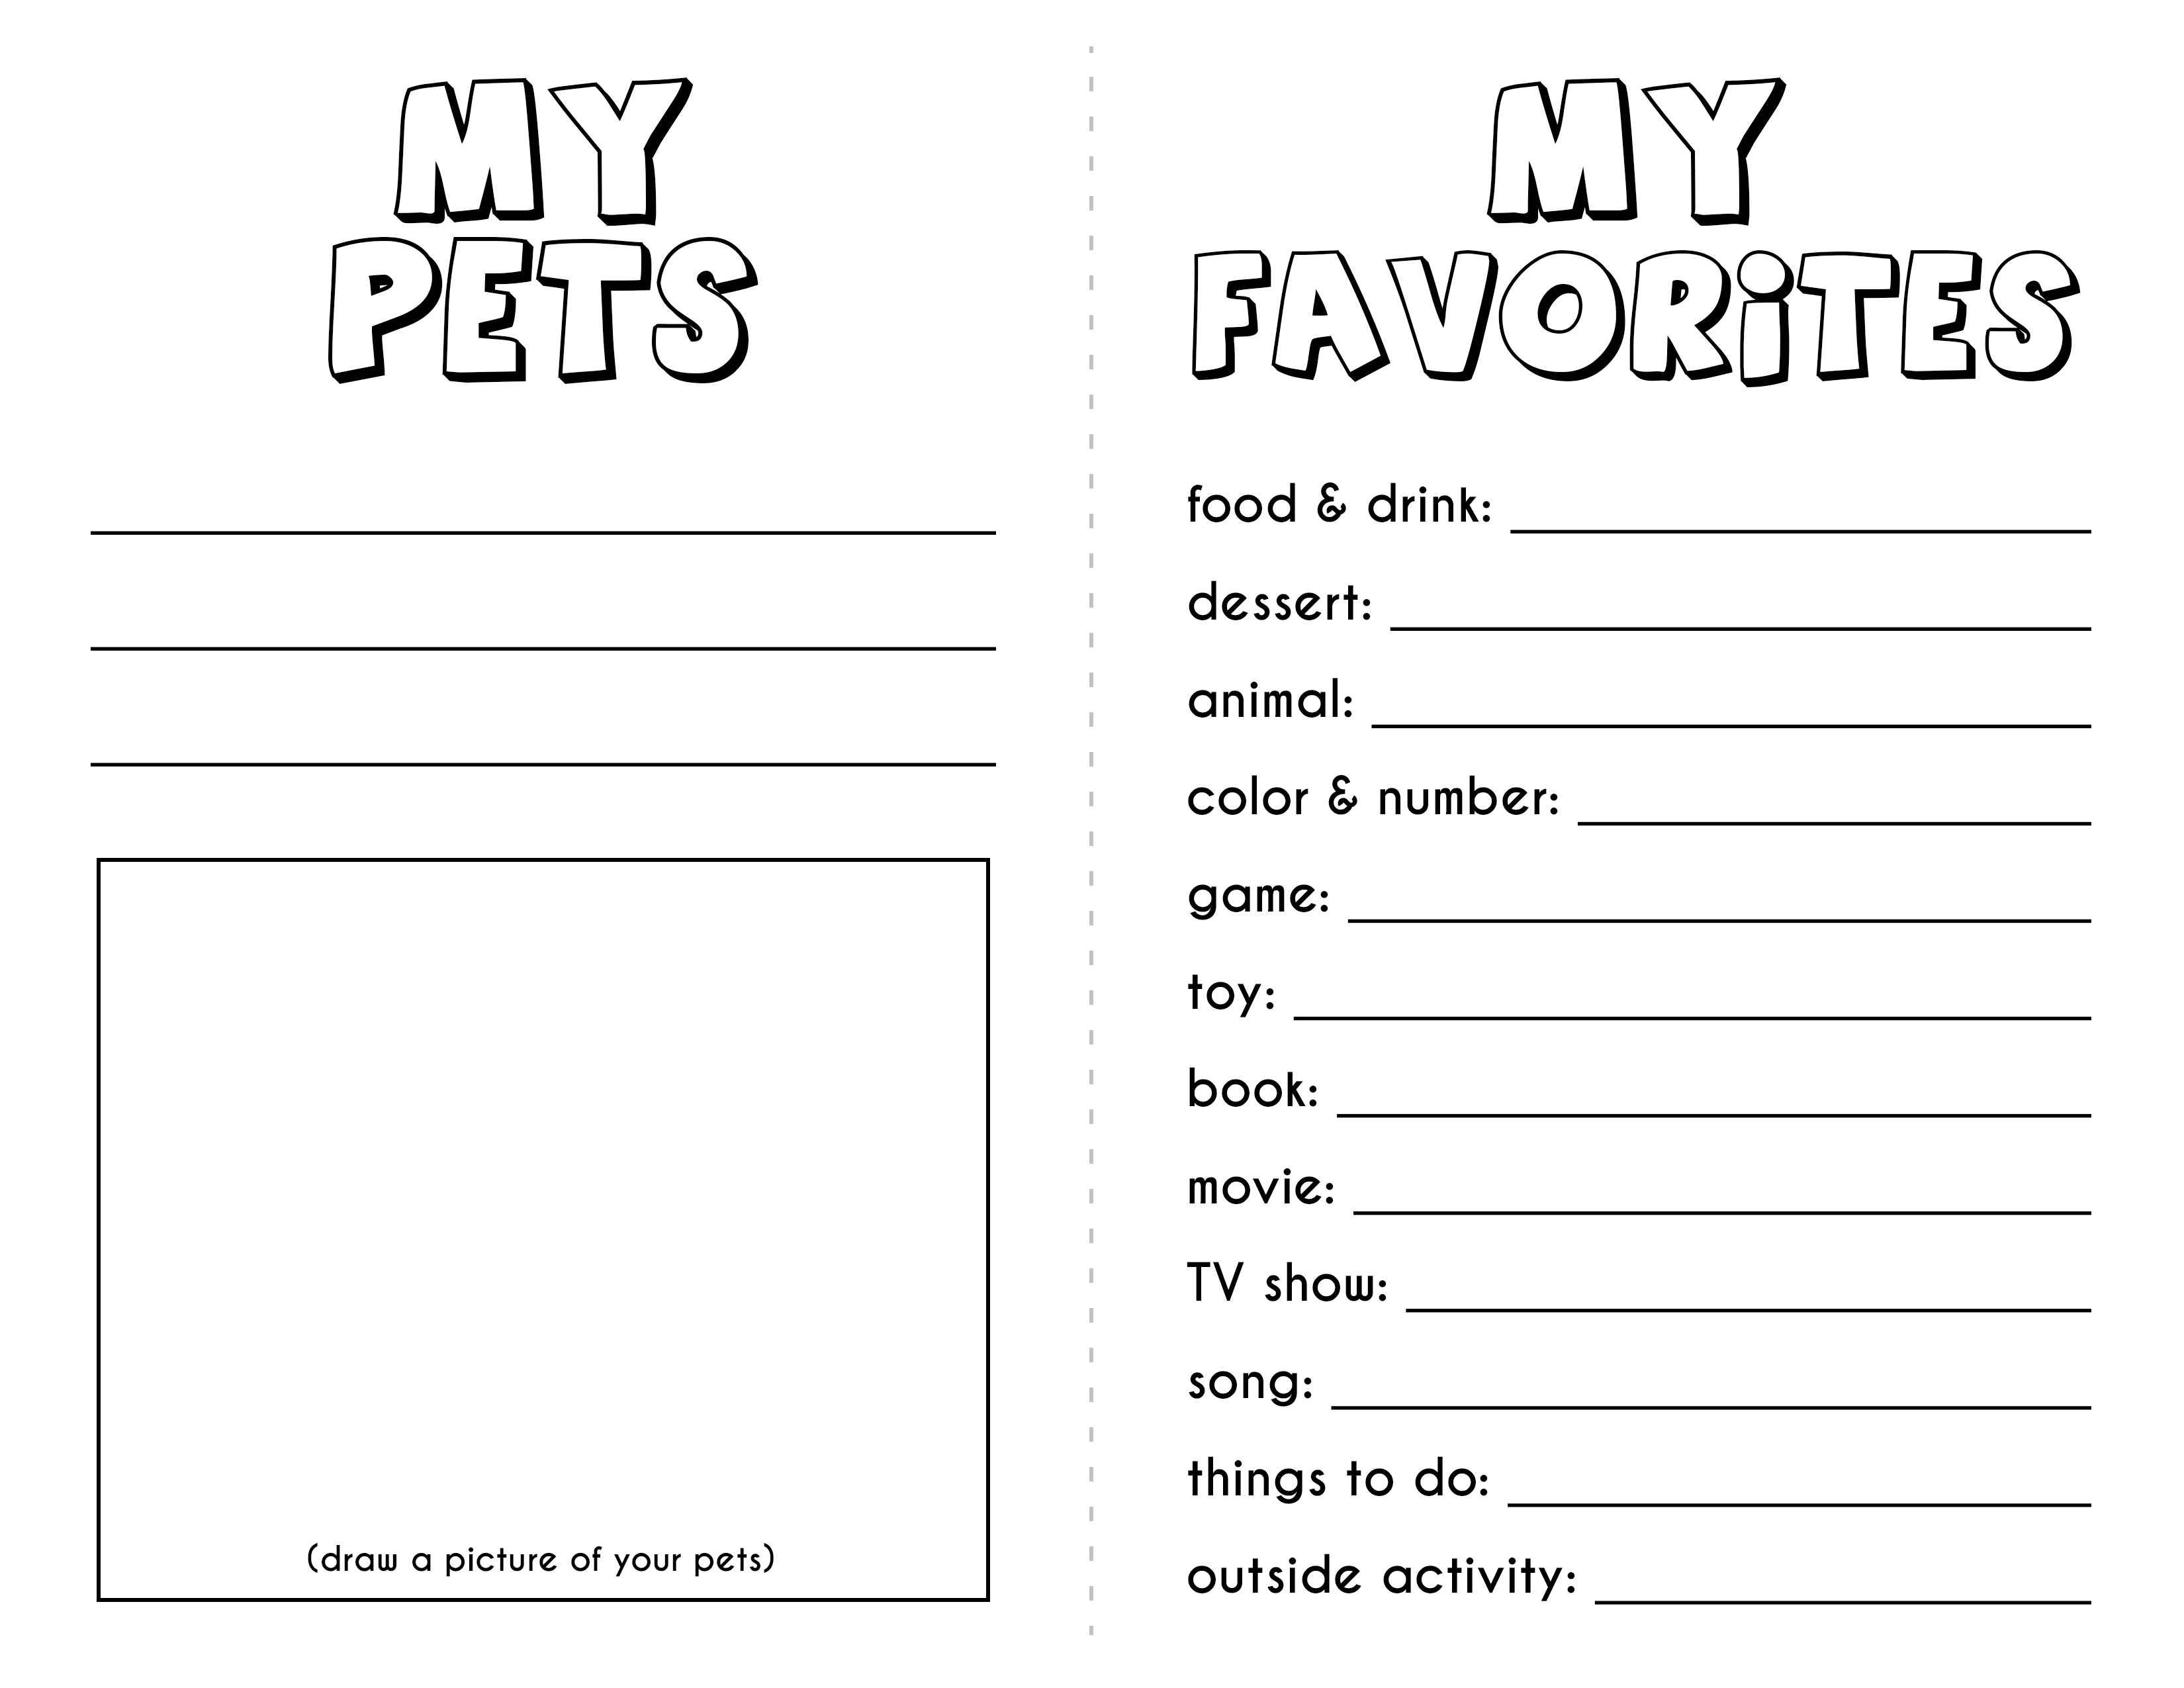 all-about-me-book-free-printables